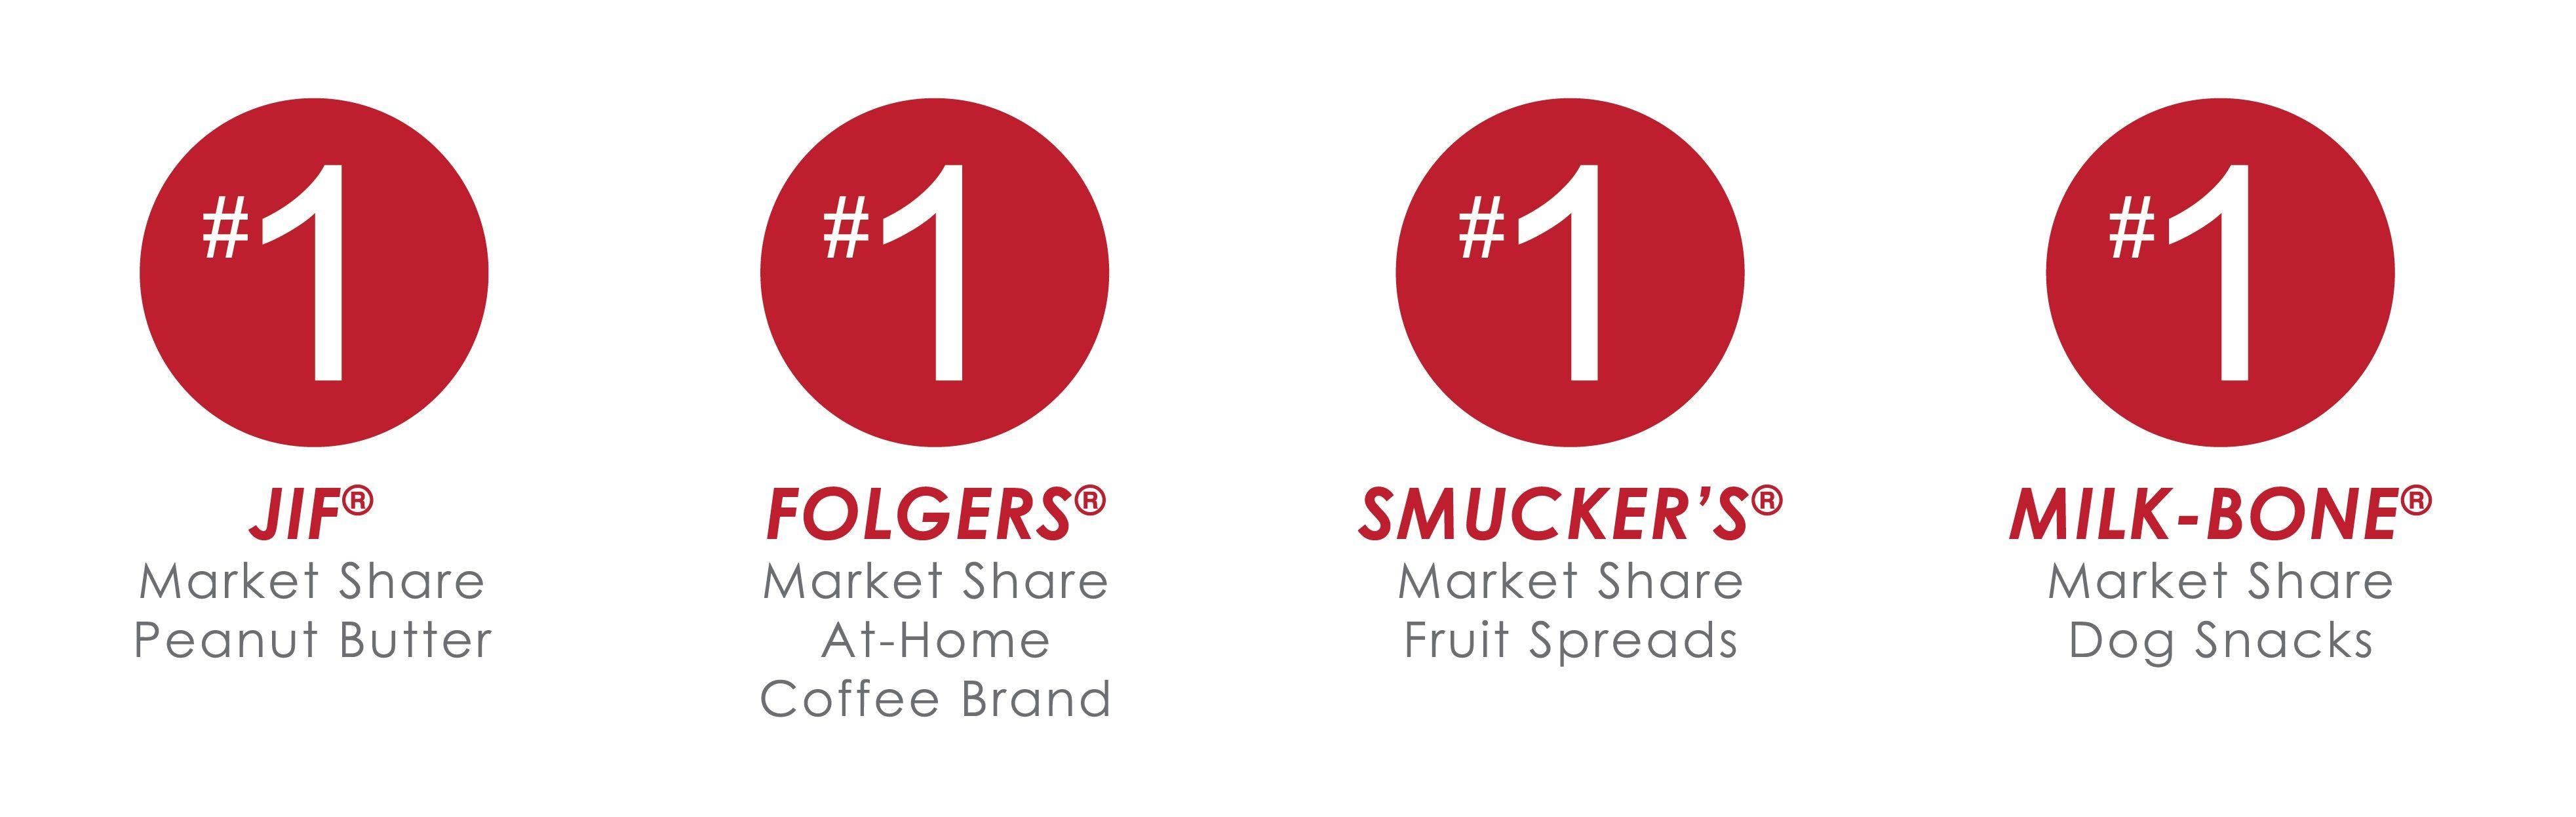 Leading Coffee Brand in USA Logo - Smucker Brands - The J.M. Smucker Company